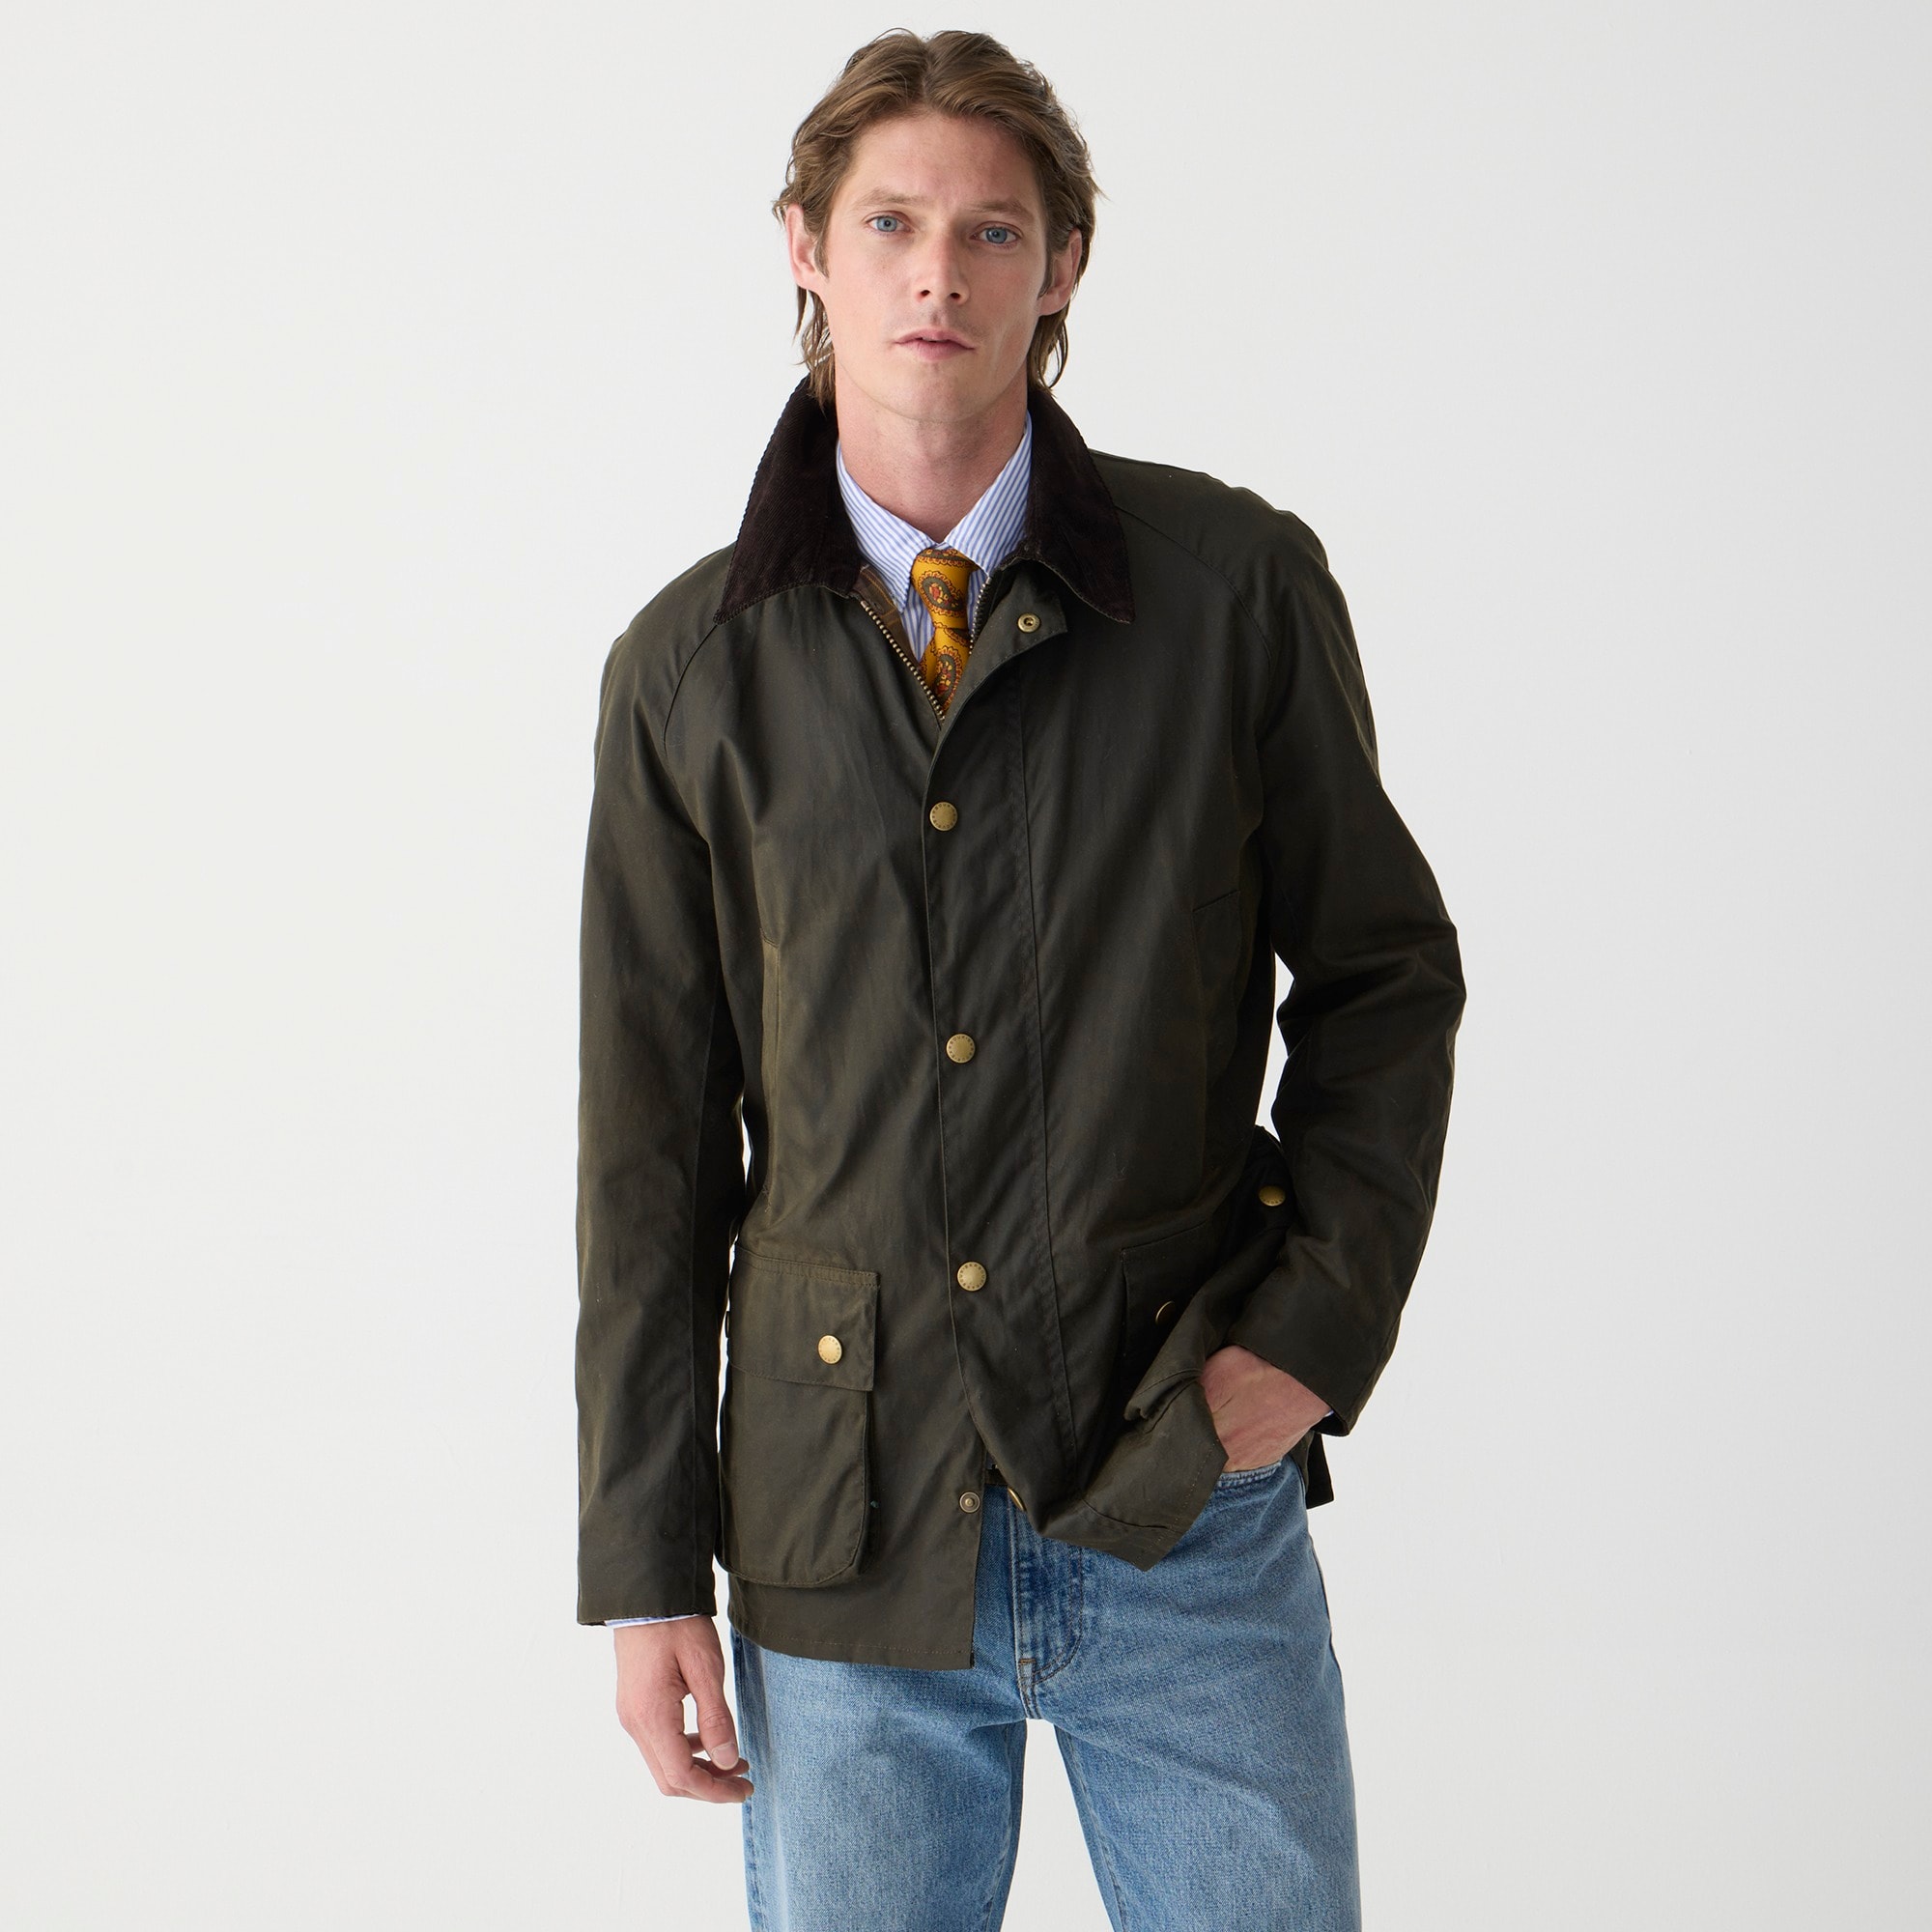 j crew barbour ashby